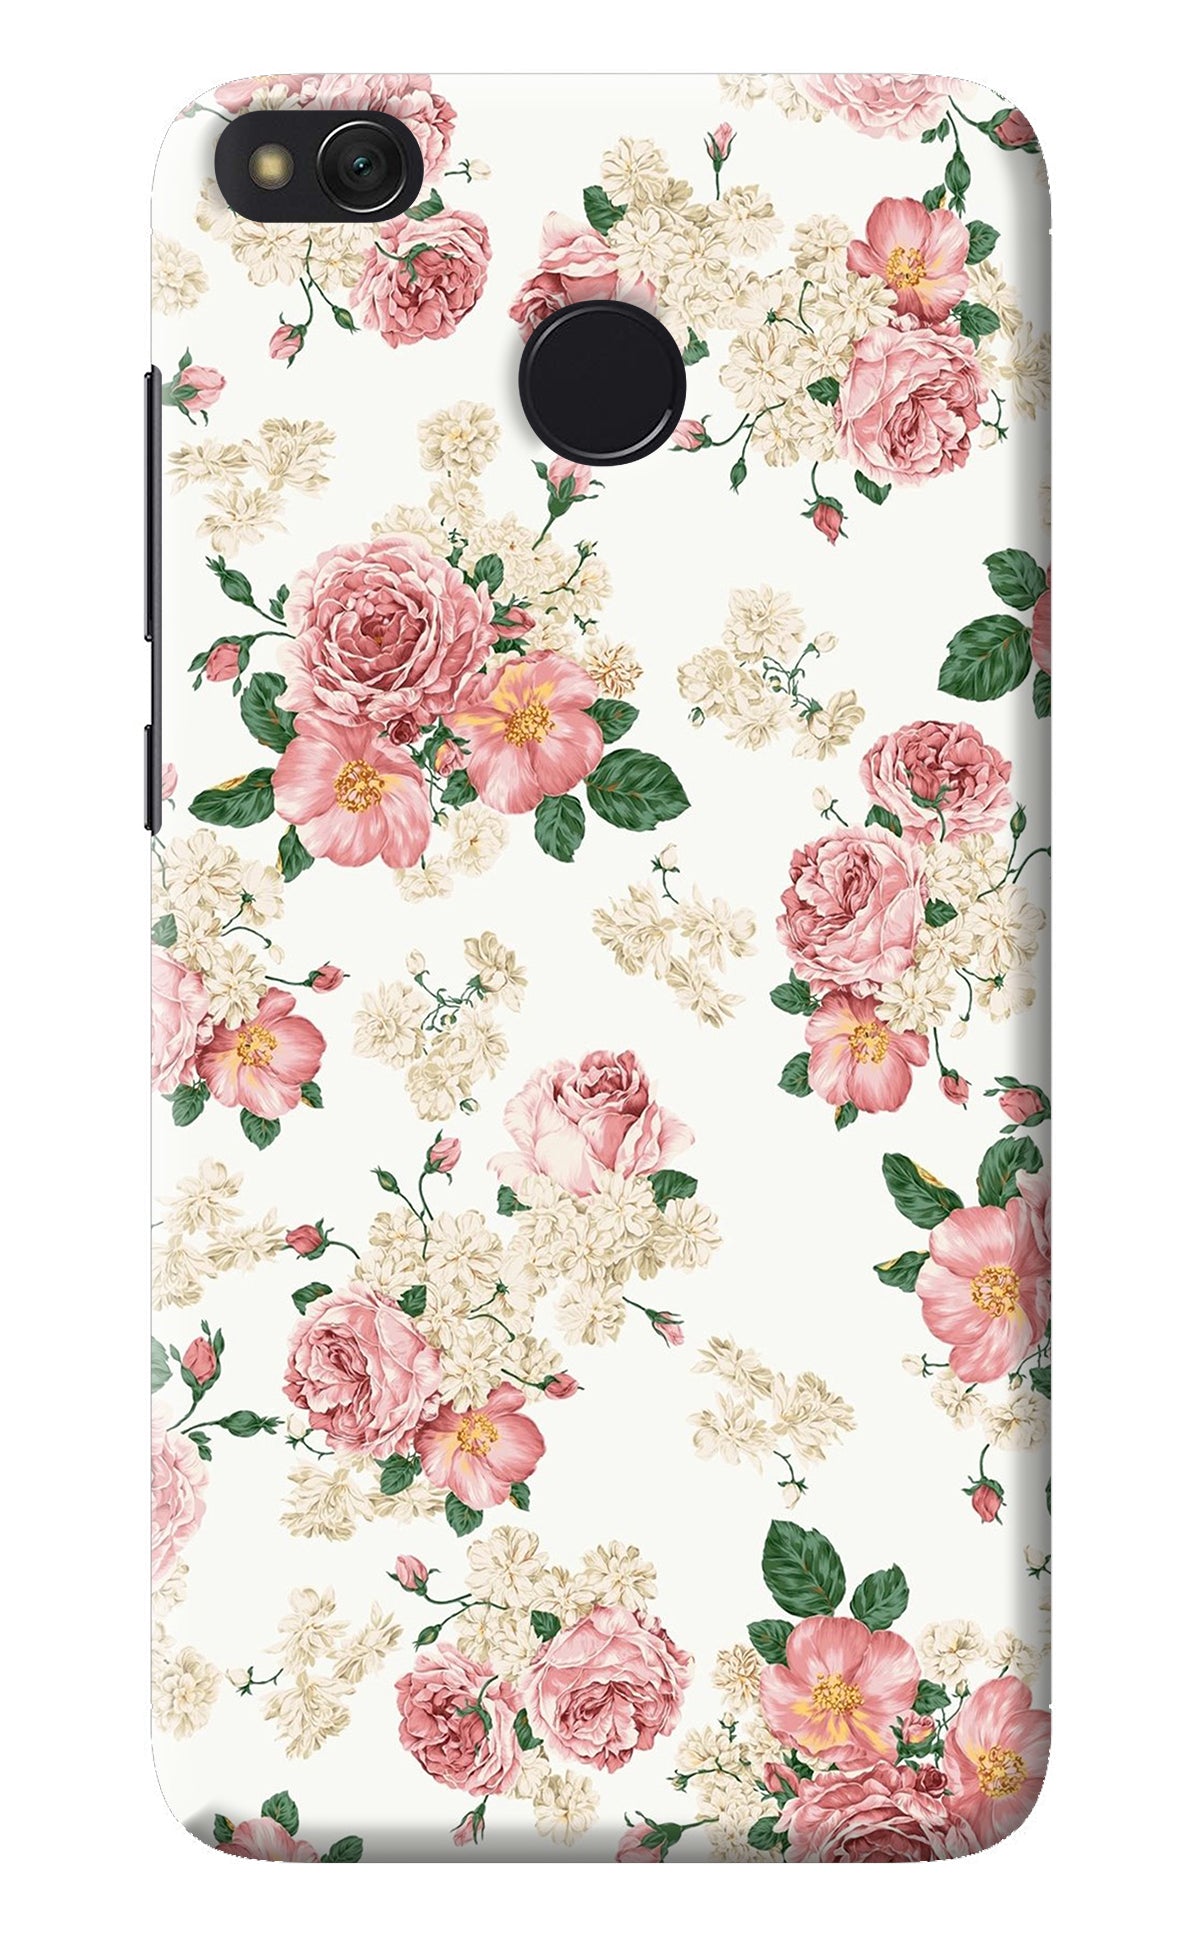 Flowers Redmi 4 Back Cover